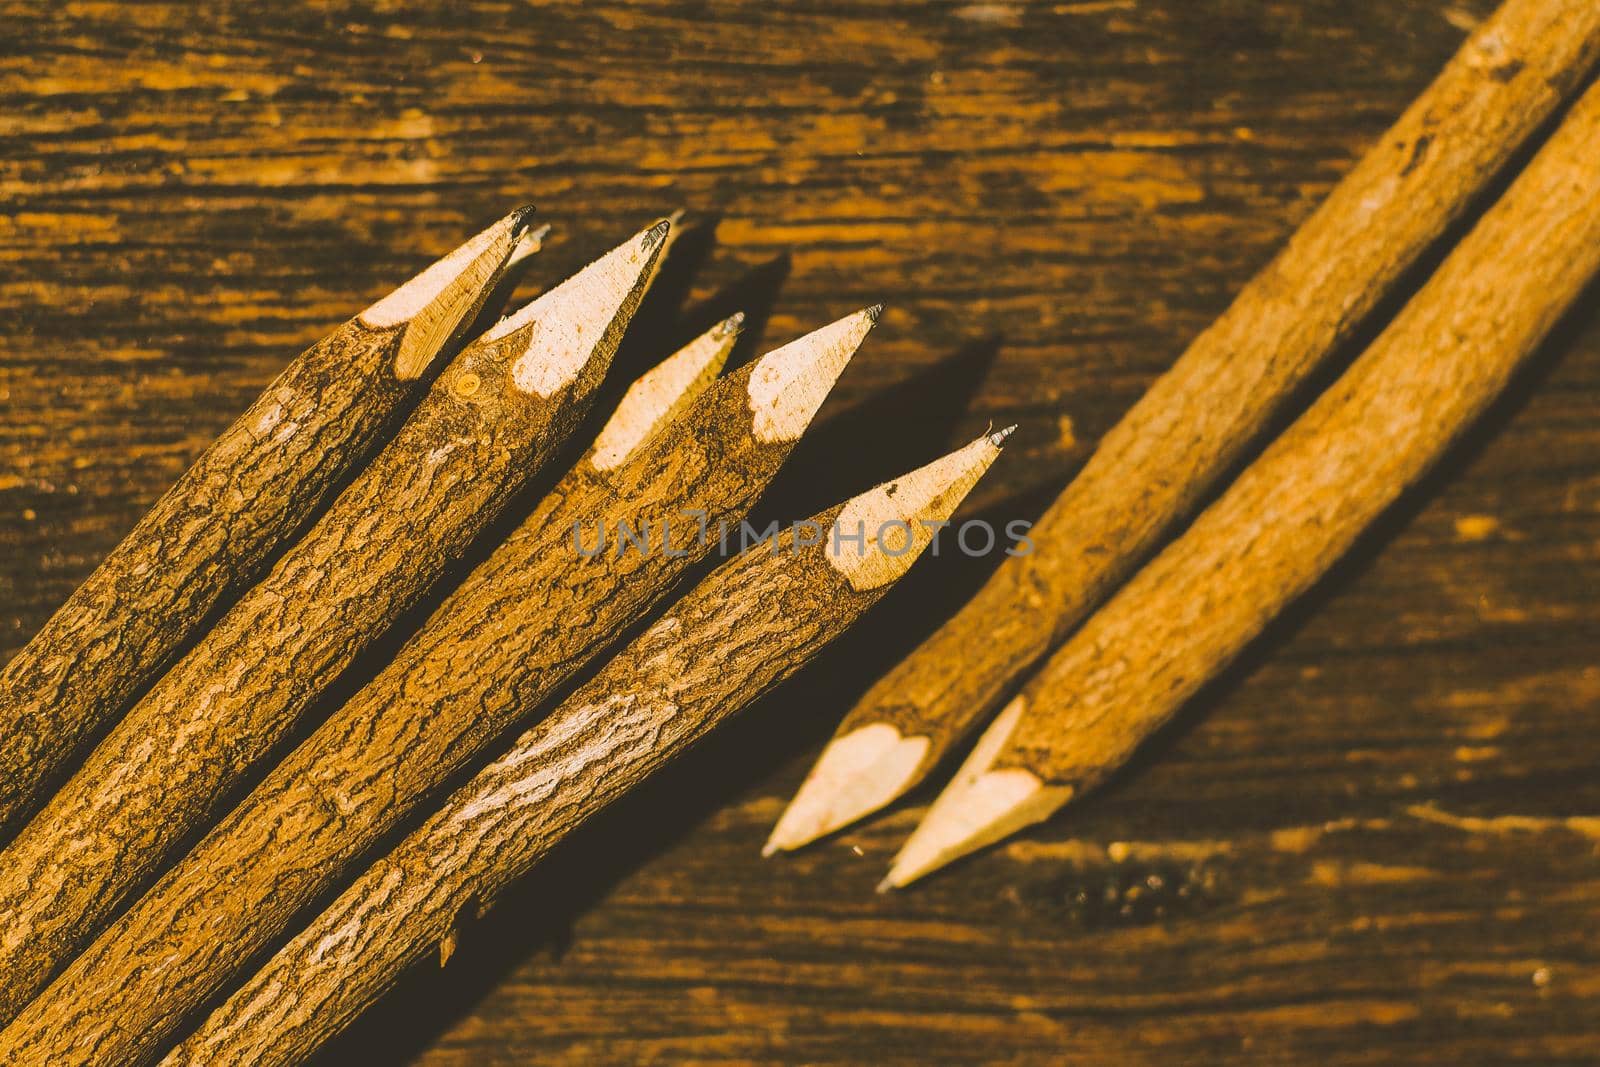 Sharp nature wood pencils on old wooden table in background by Petrichor